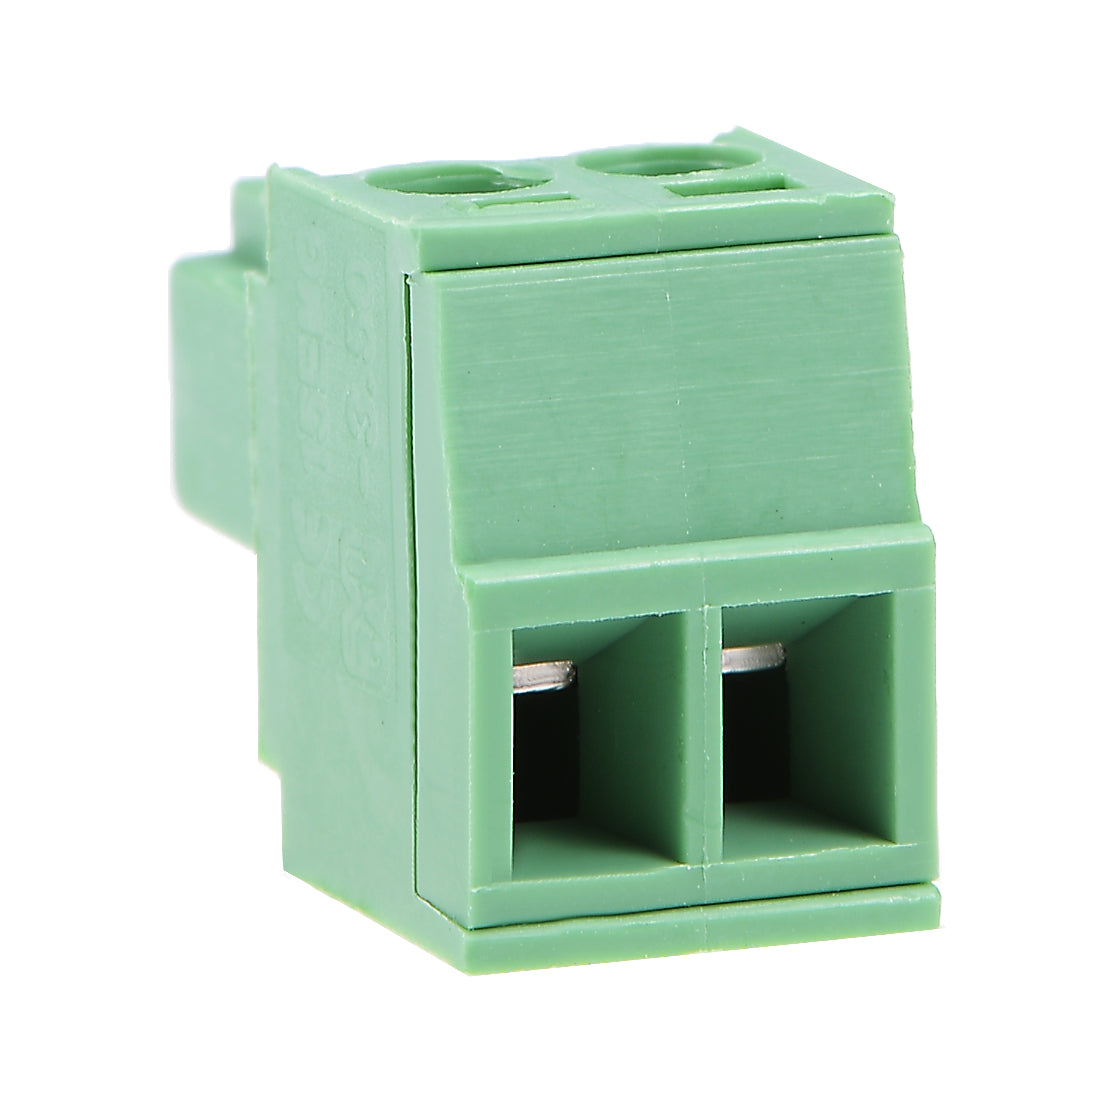 uxcell Uxcell 15Pcs AC300V 10A 3.81mm Pitch 2P Needle Seat Insert-In PCB Terminal Block green